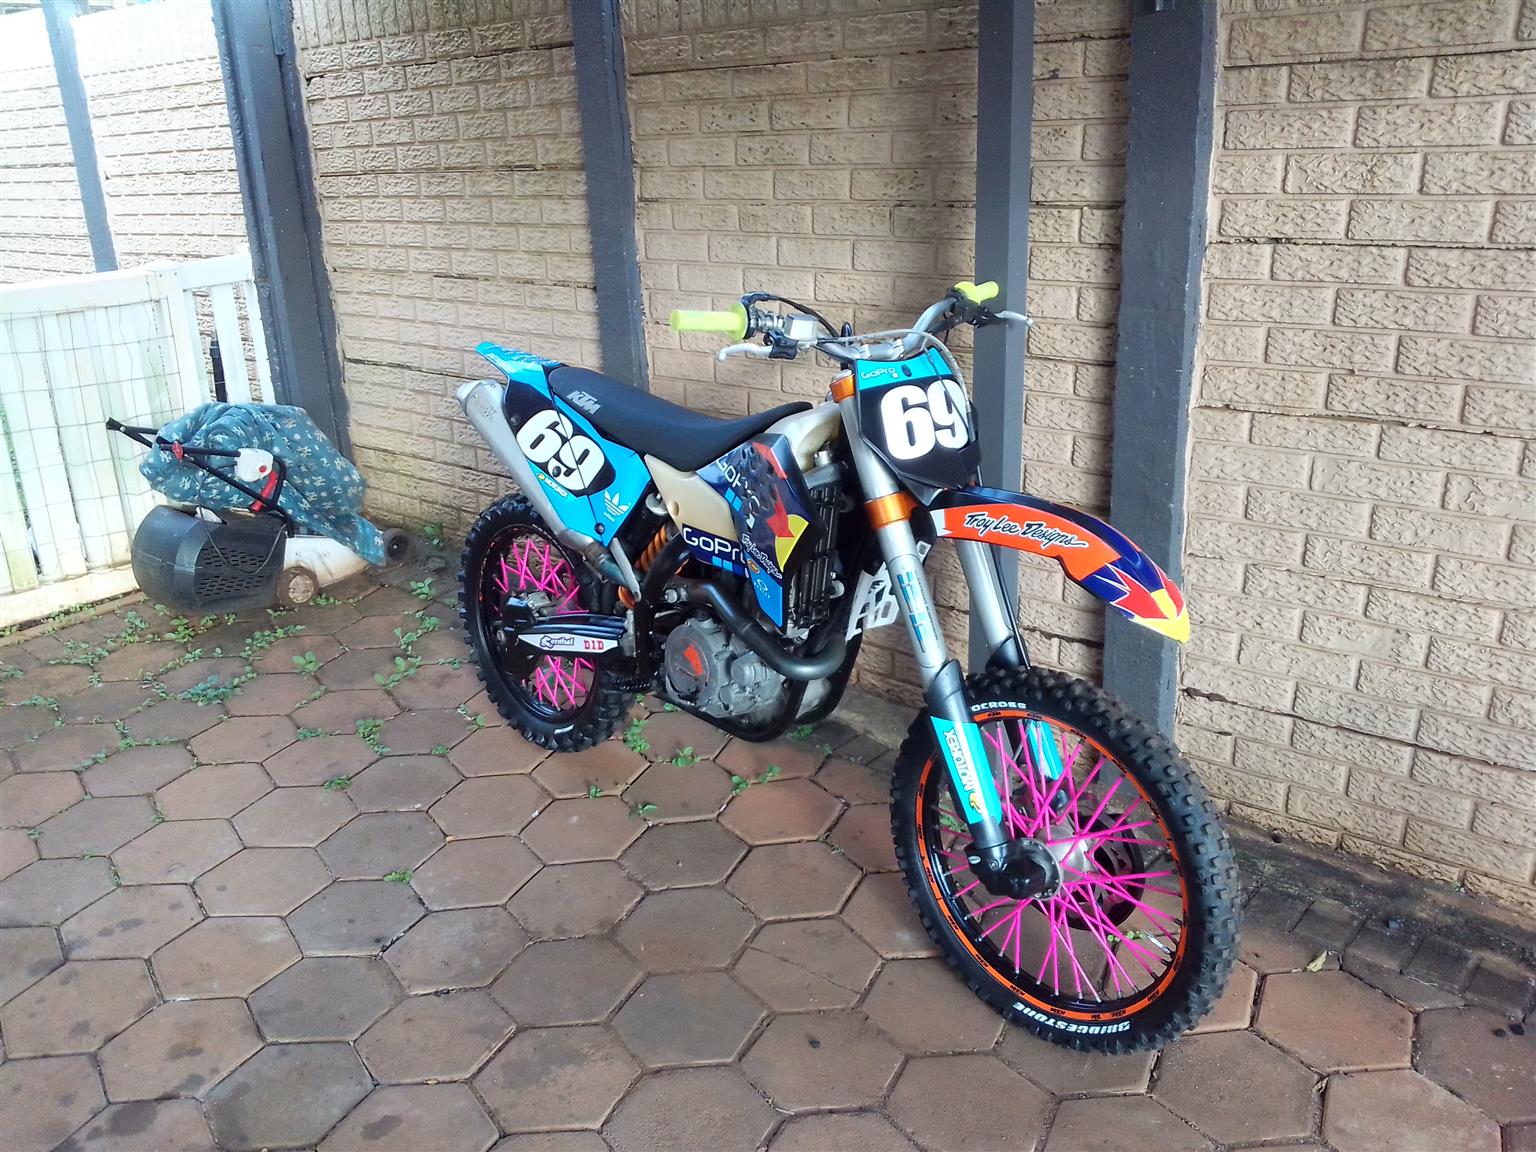 Late 2008 Ktm Sx-f 450 with extras on for sale!